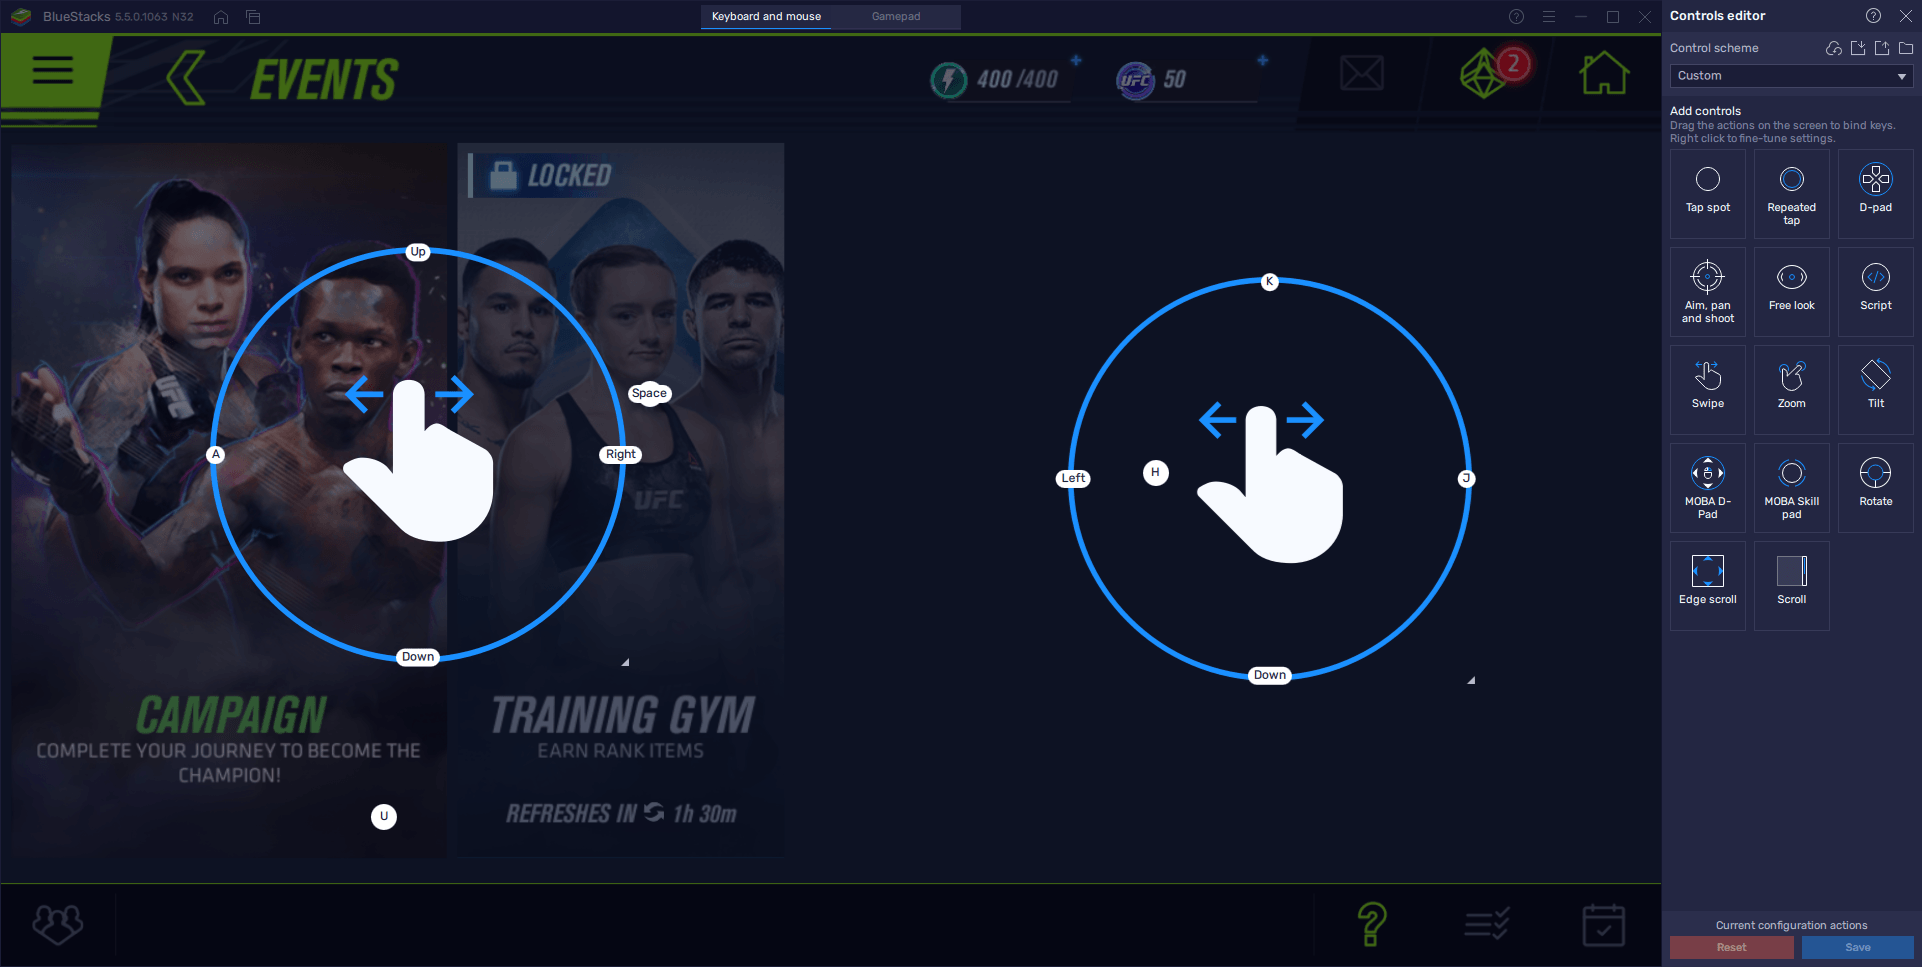 UFC Mobile 2 on PC - How to Configure BlueStacks to Get the Best Controls and Performance